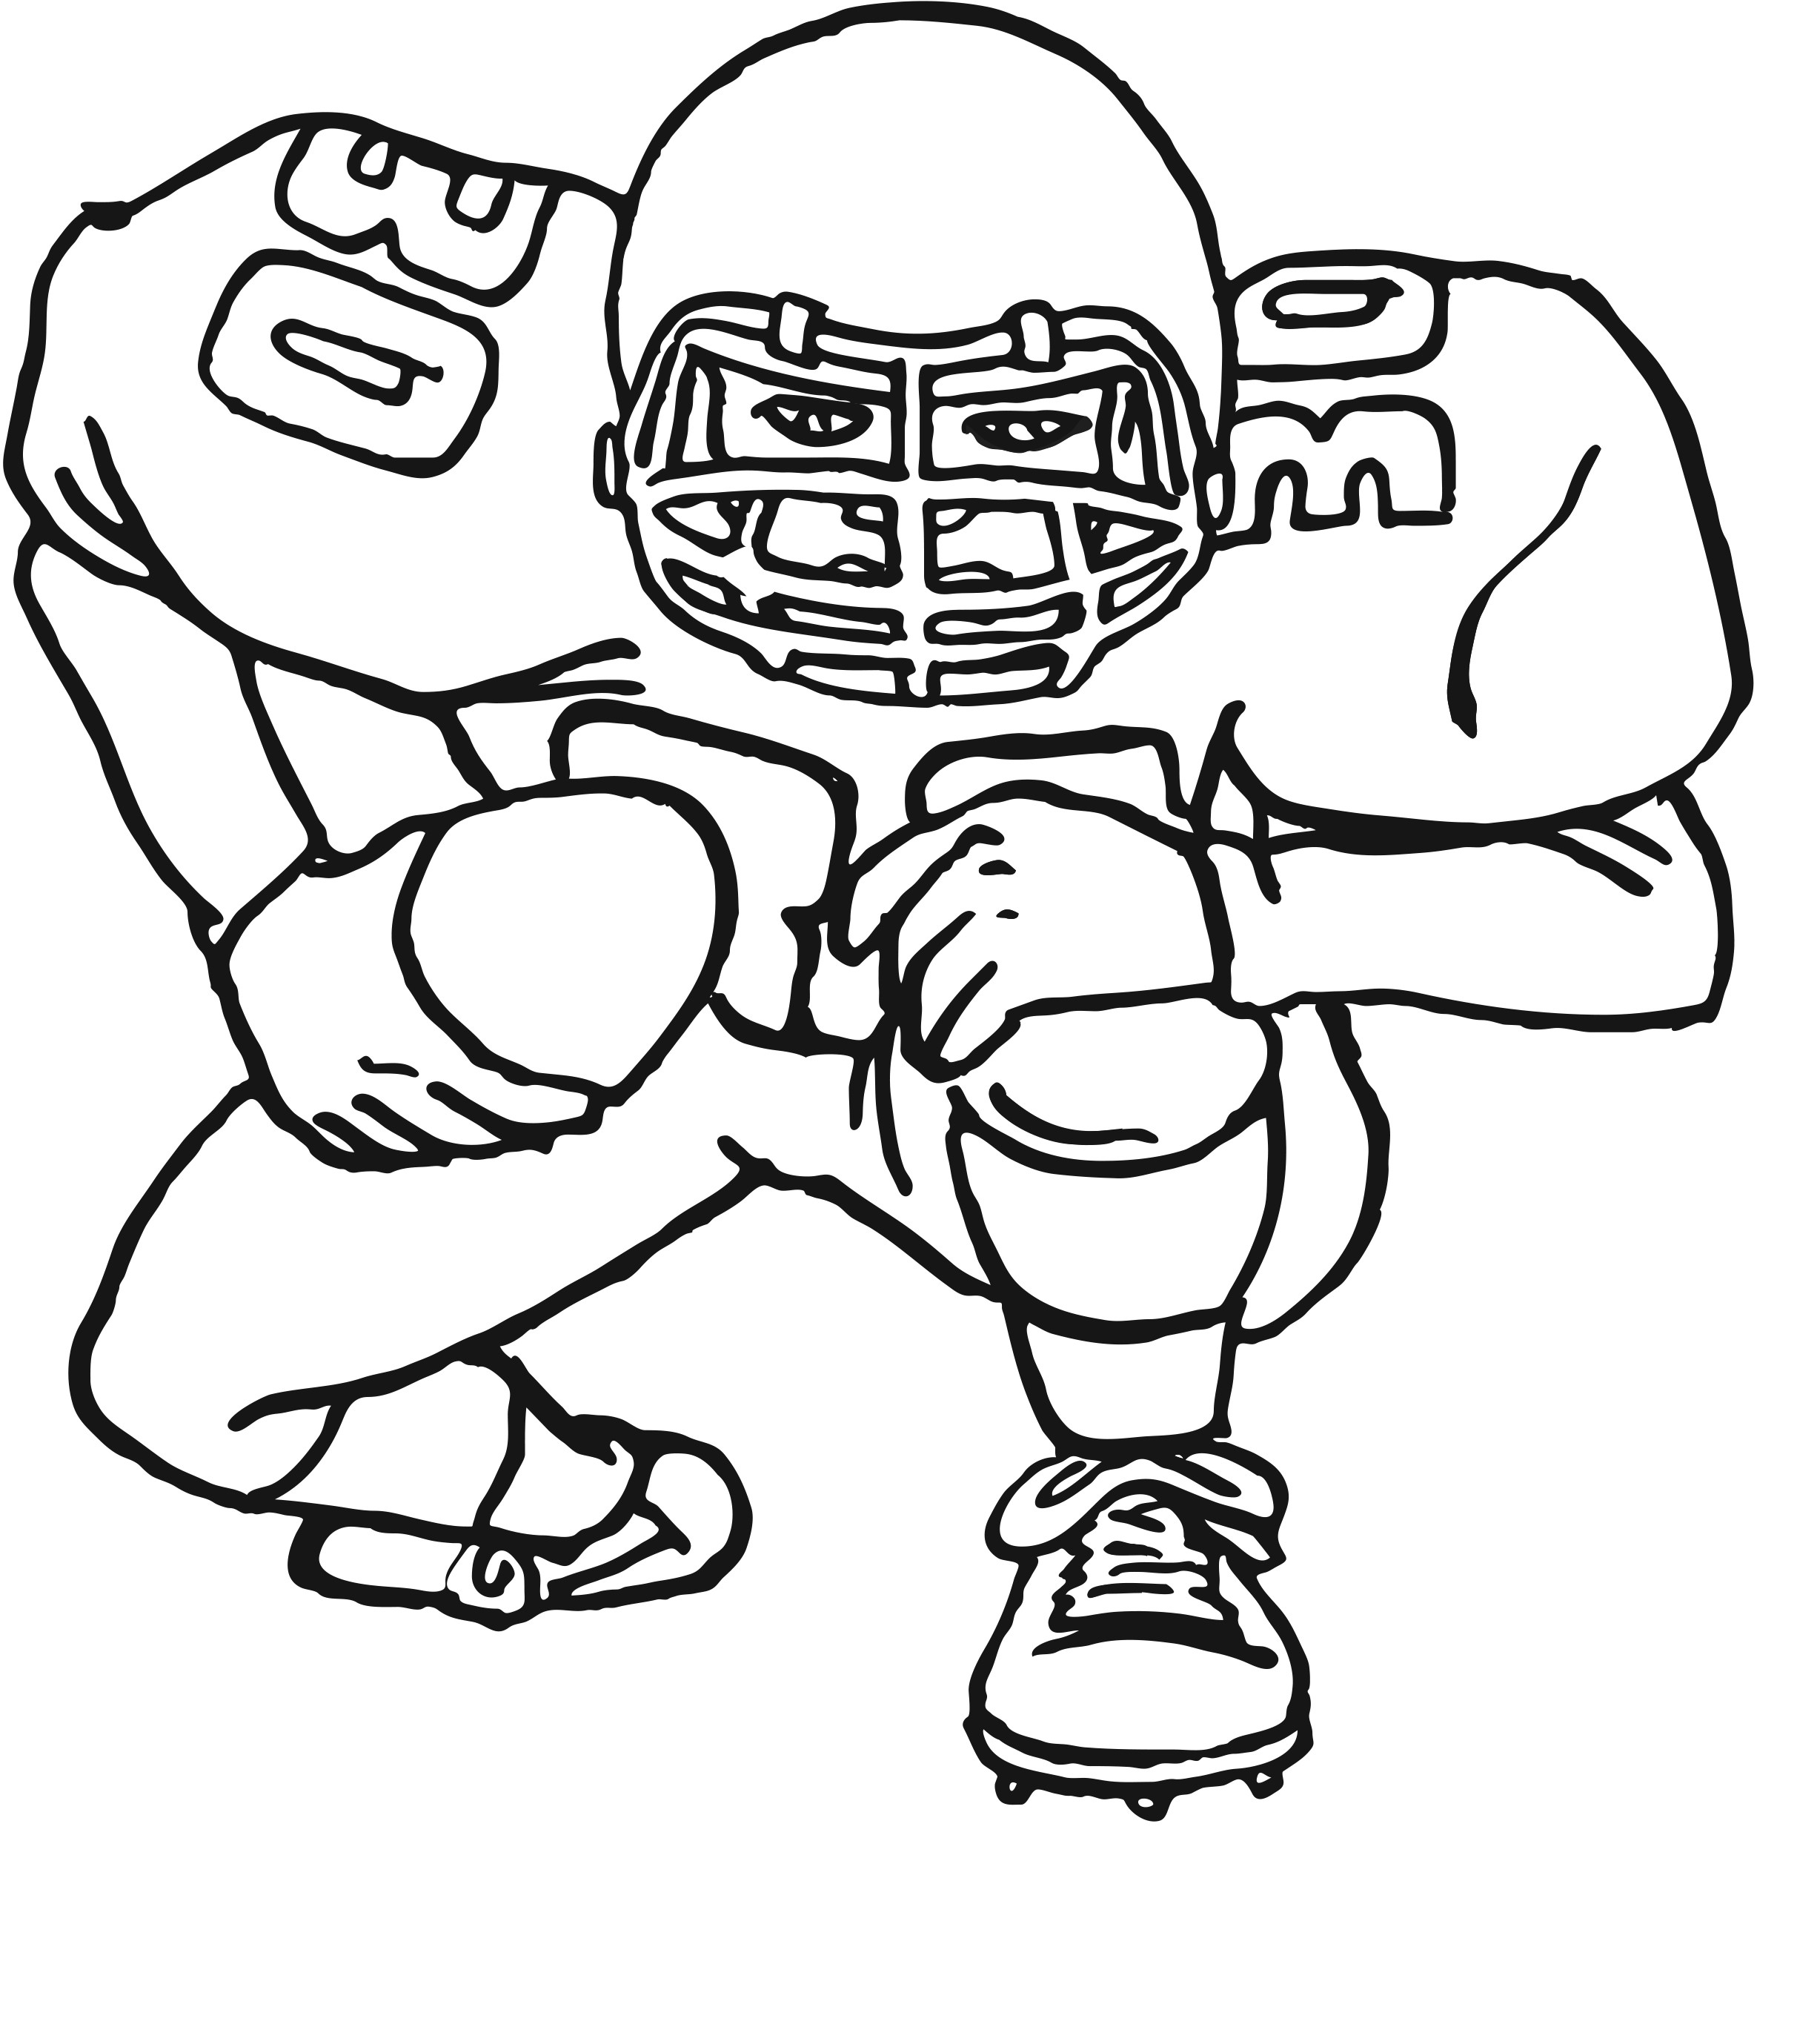 New England Patriots Coloring Pages at GetColoringscom